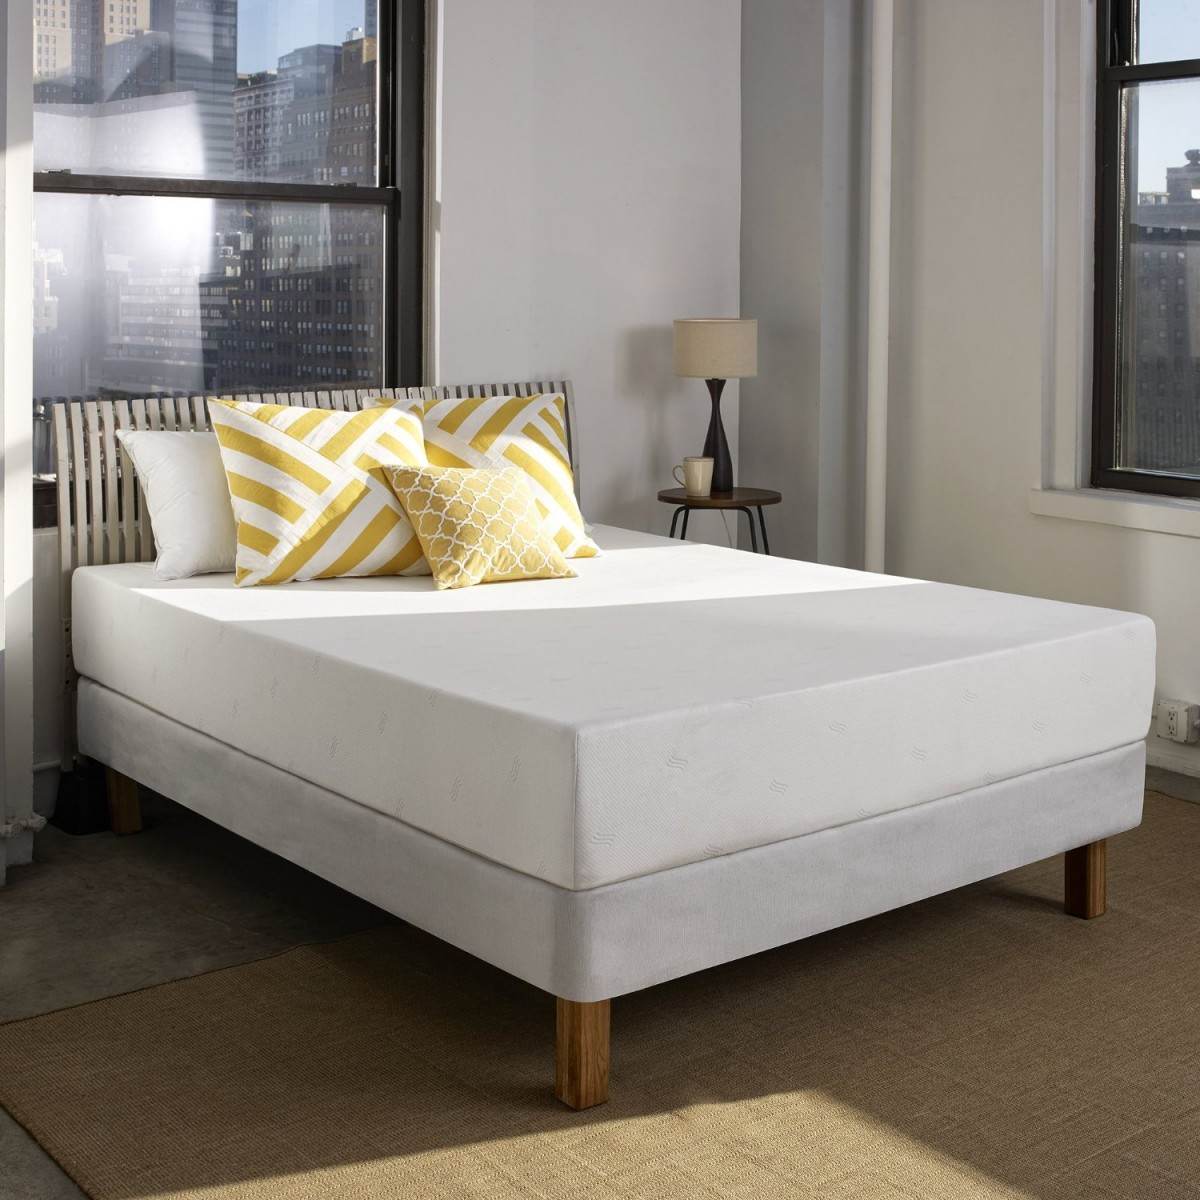 Our 5 Best Mattresses for Side Sleepers - 2018 - Reviews ...